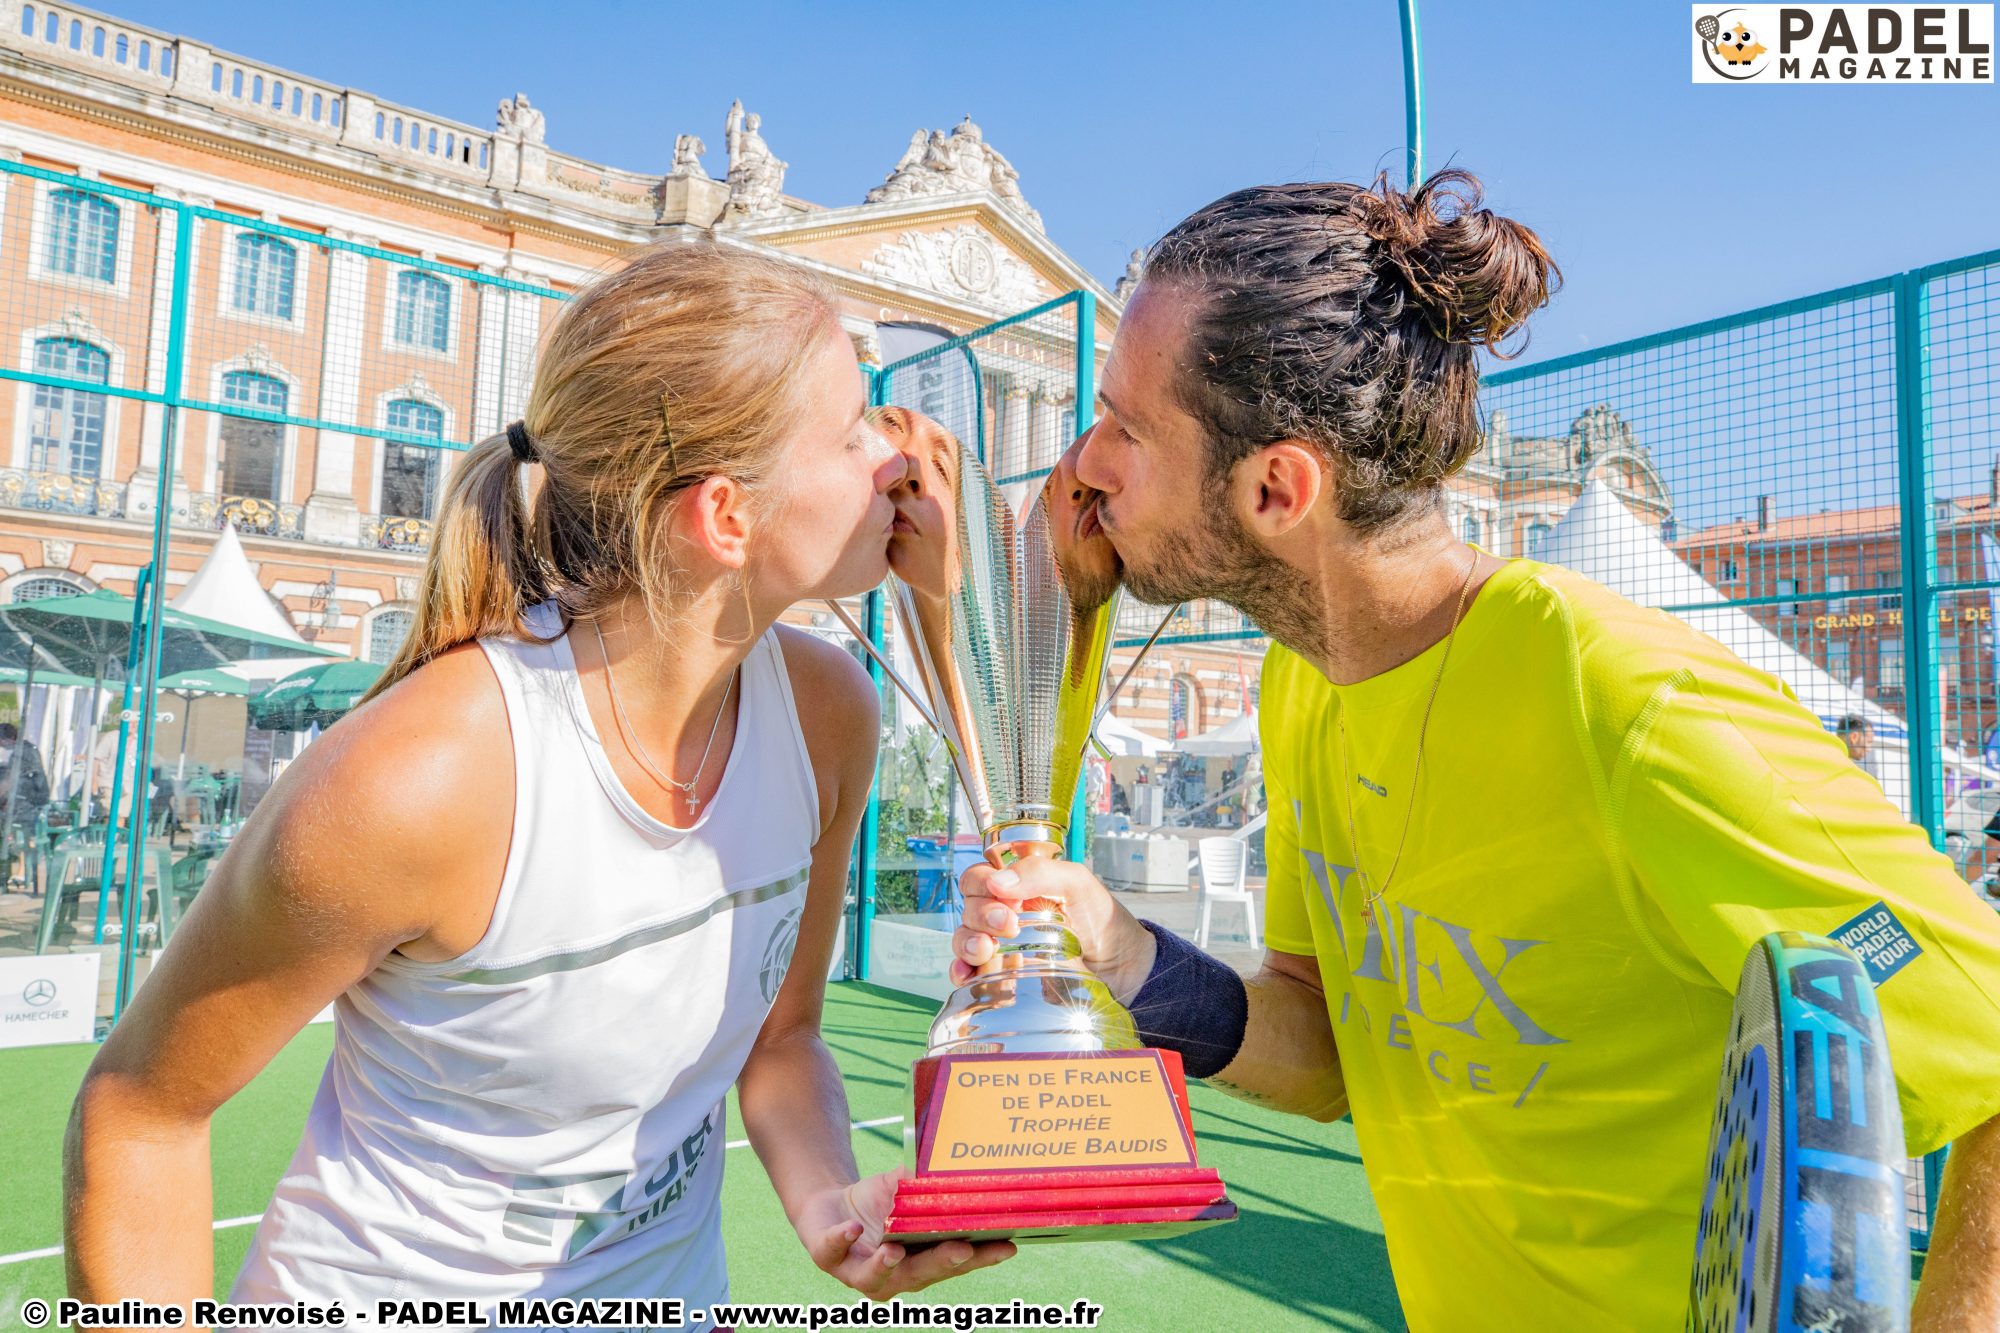 Unheard of success at the French Open of Padel 2018